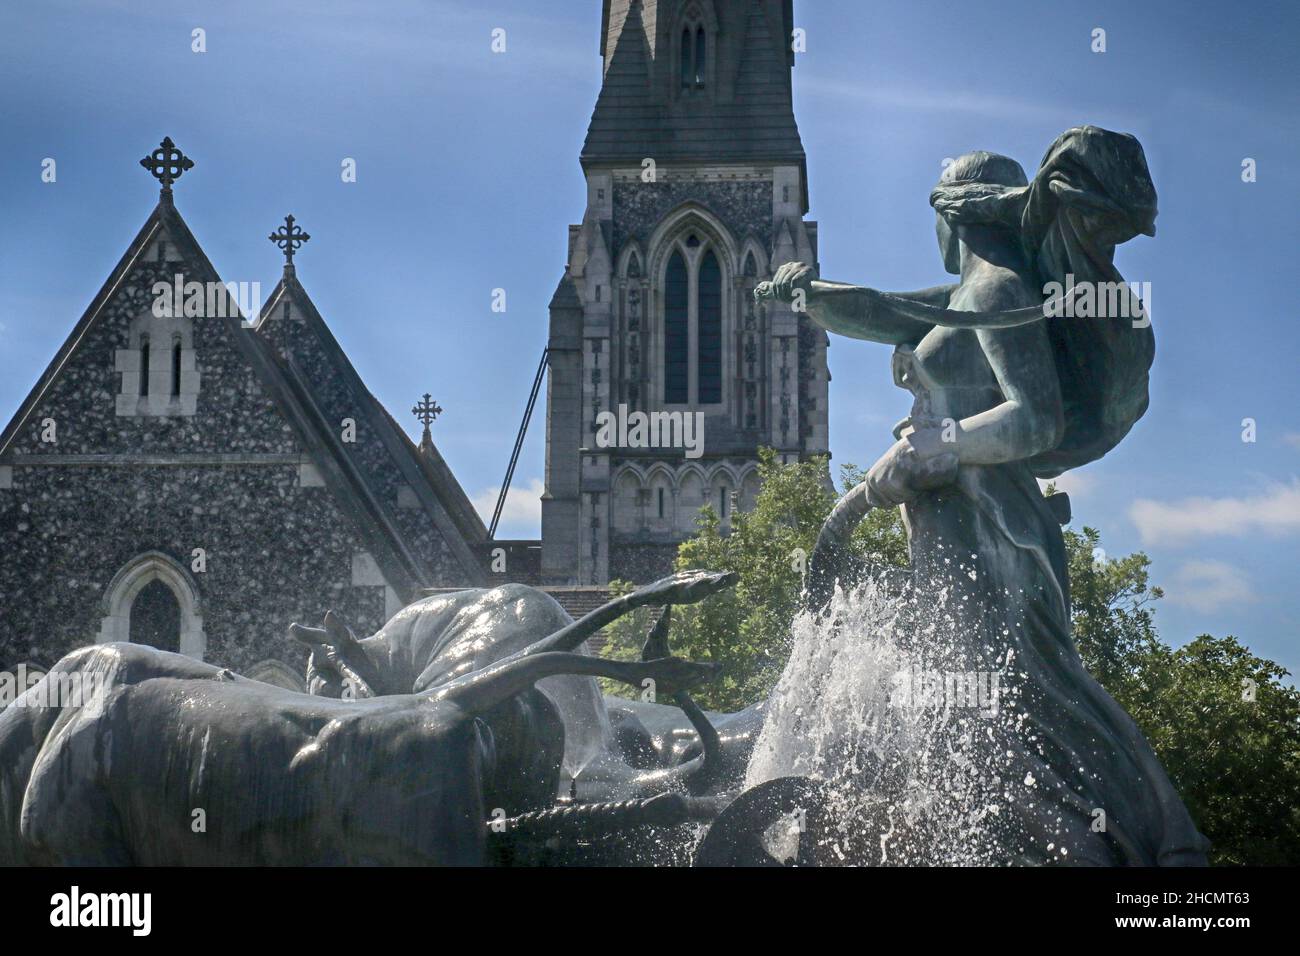 Copenhagen, Denmark - St. Alban's English Church in Gothic Revival style and goddess Gefion fountain from 1908,the largest monument in Copenhagen Stock Photo